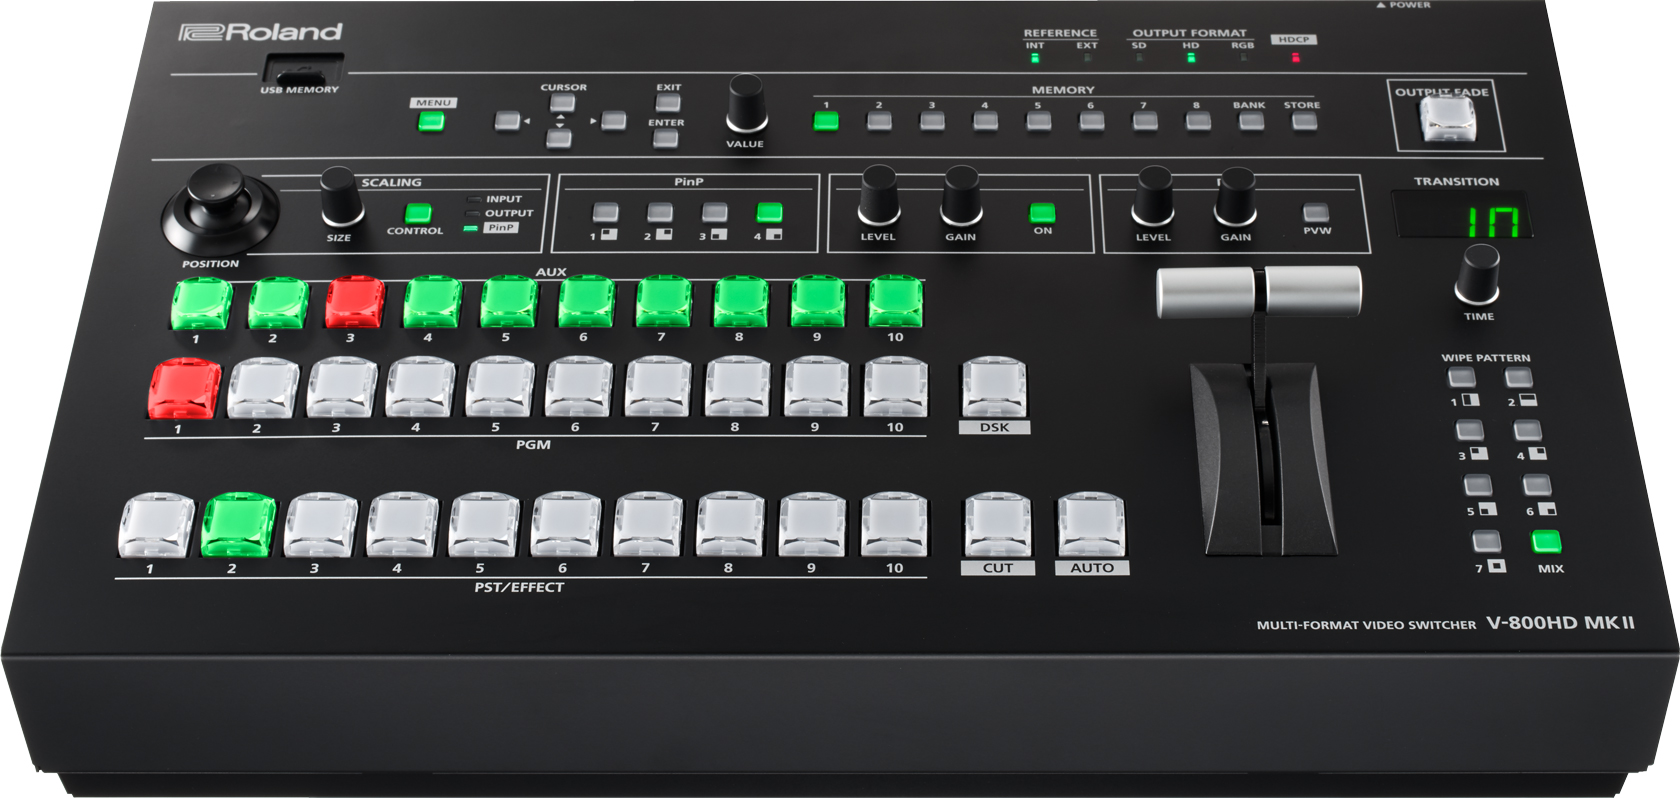 Roland V-800HD MK II front view